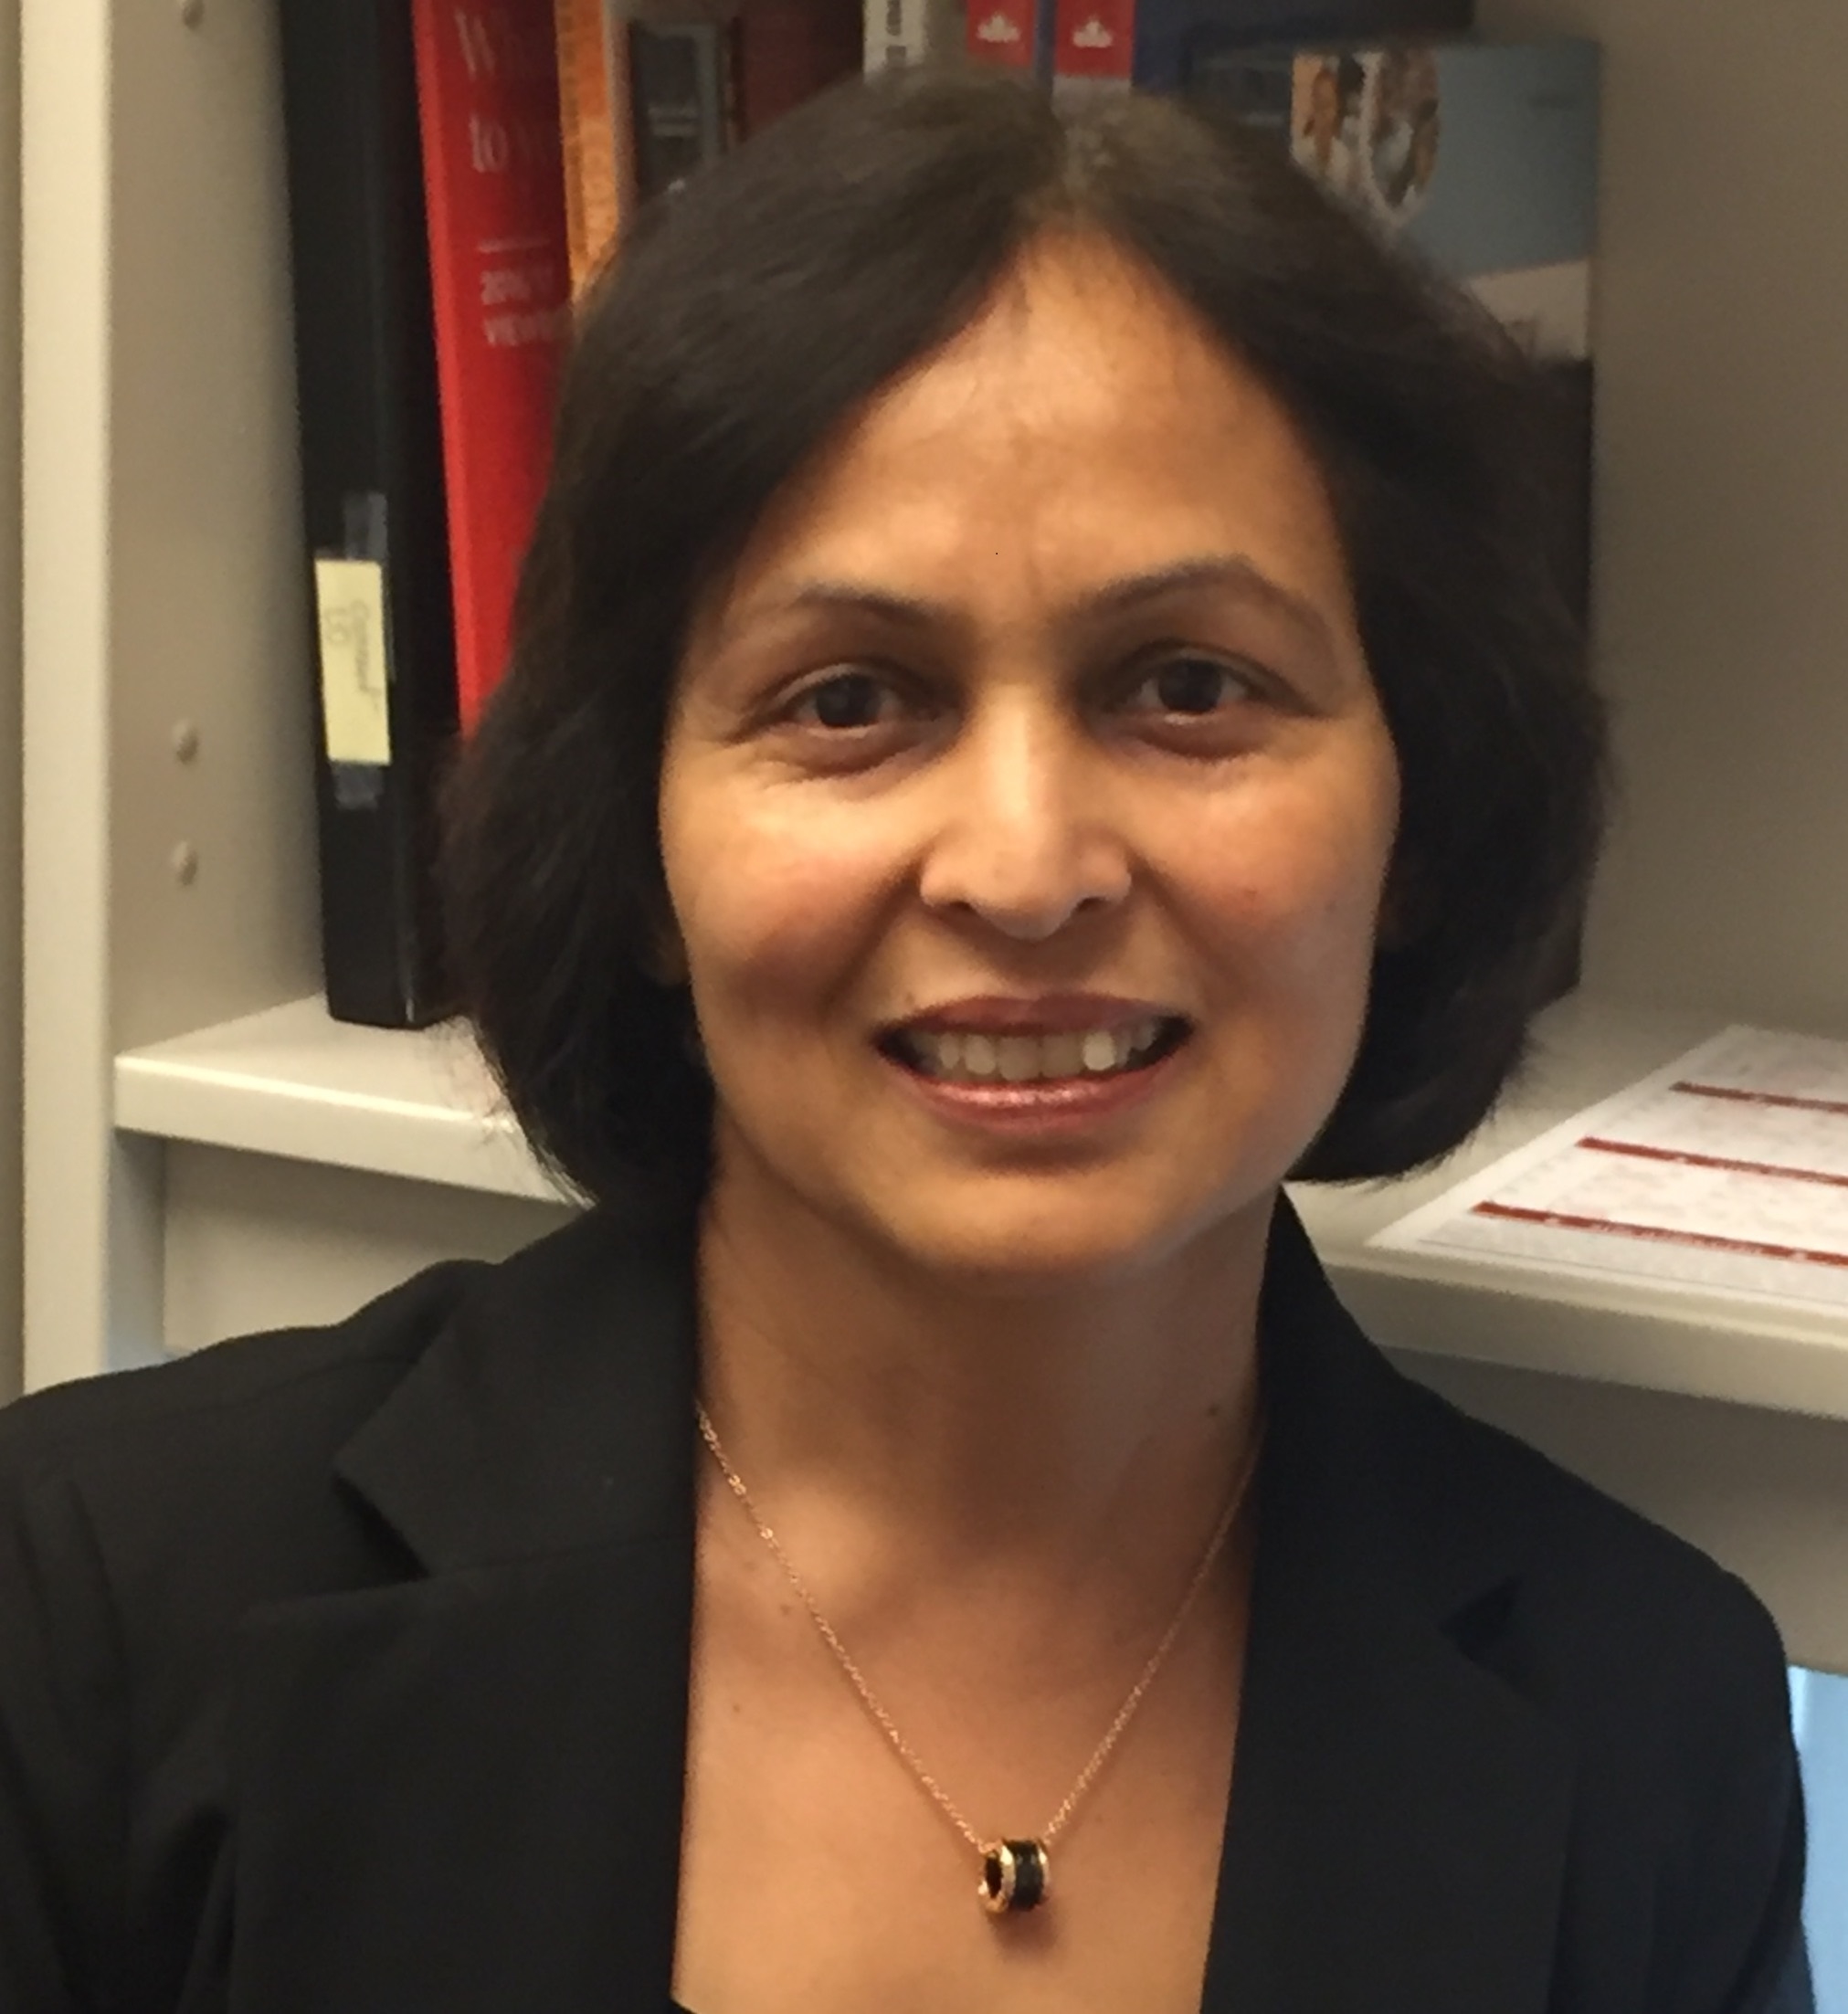 Professor Alka Bhushan teaches Economics in the School of English and Liberal Studies